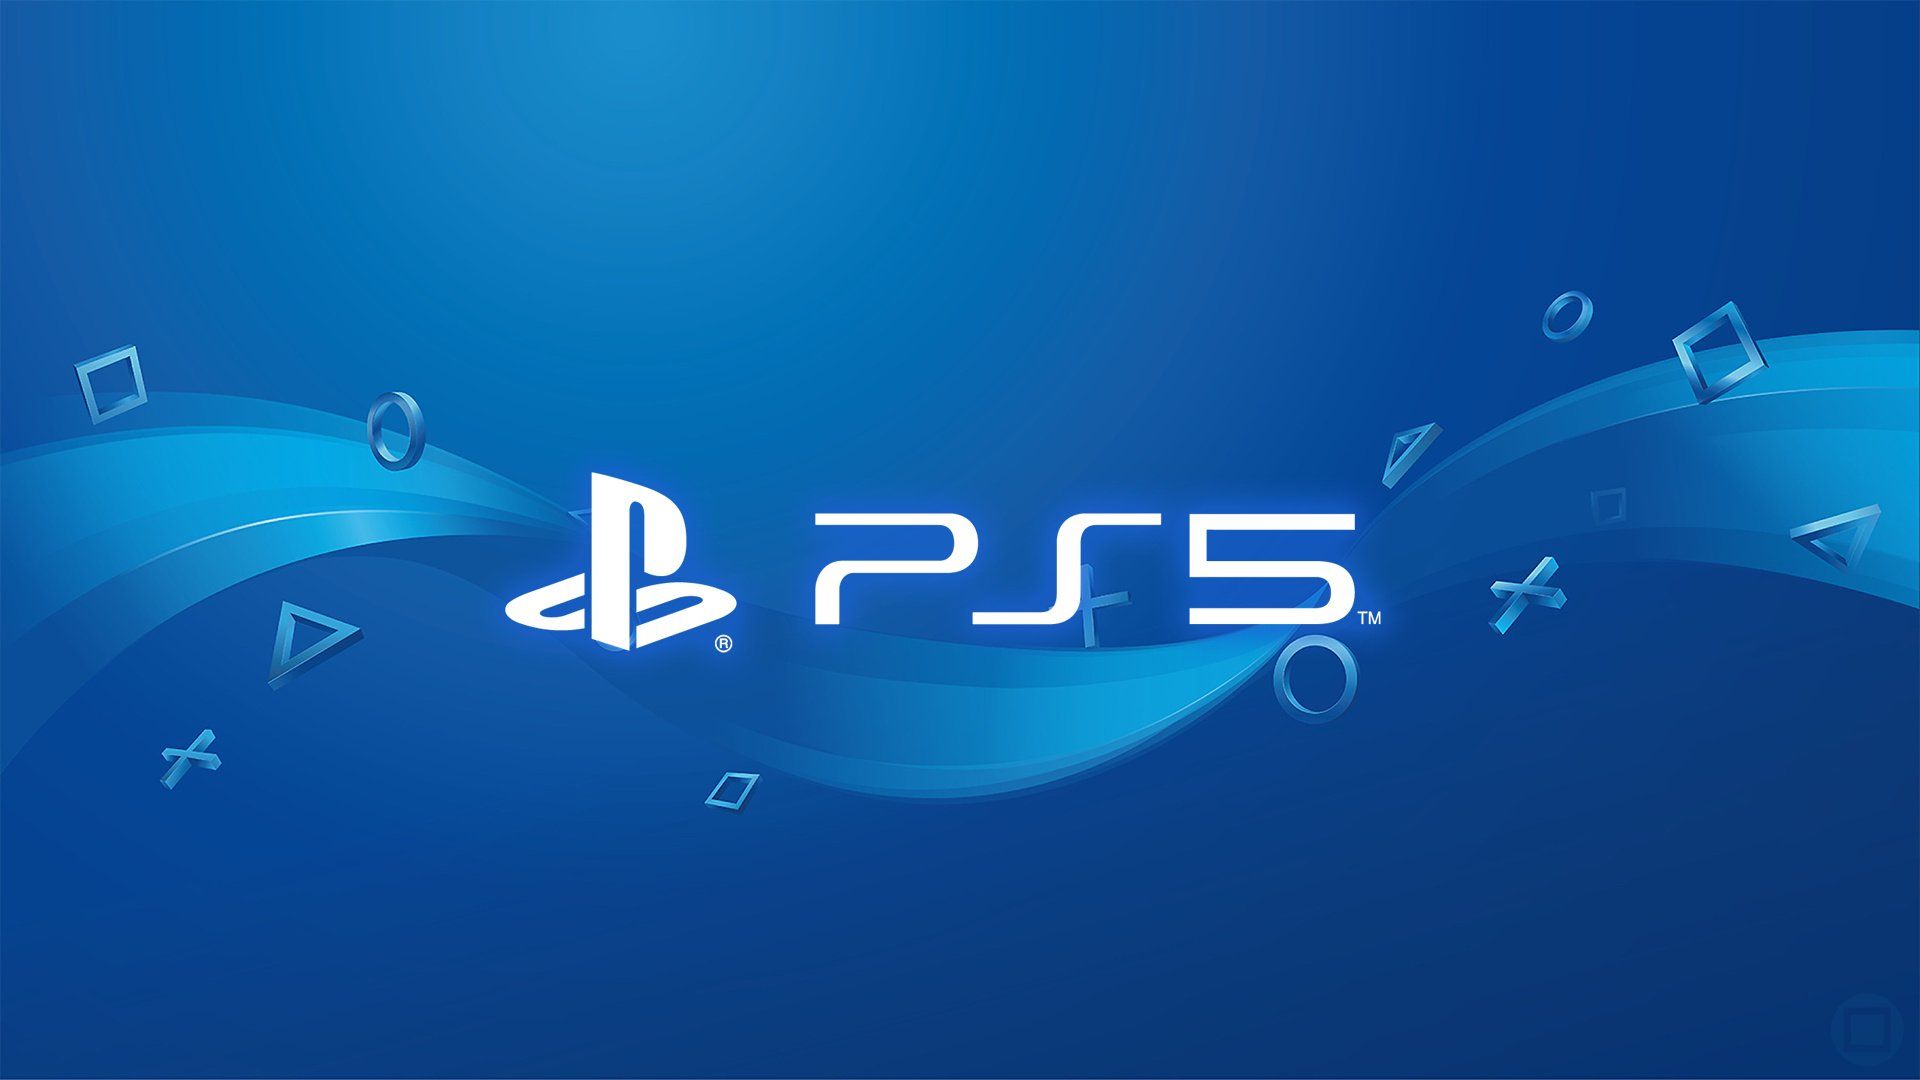 Poll: What Are Your Thoughts on the PS5's Logo?